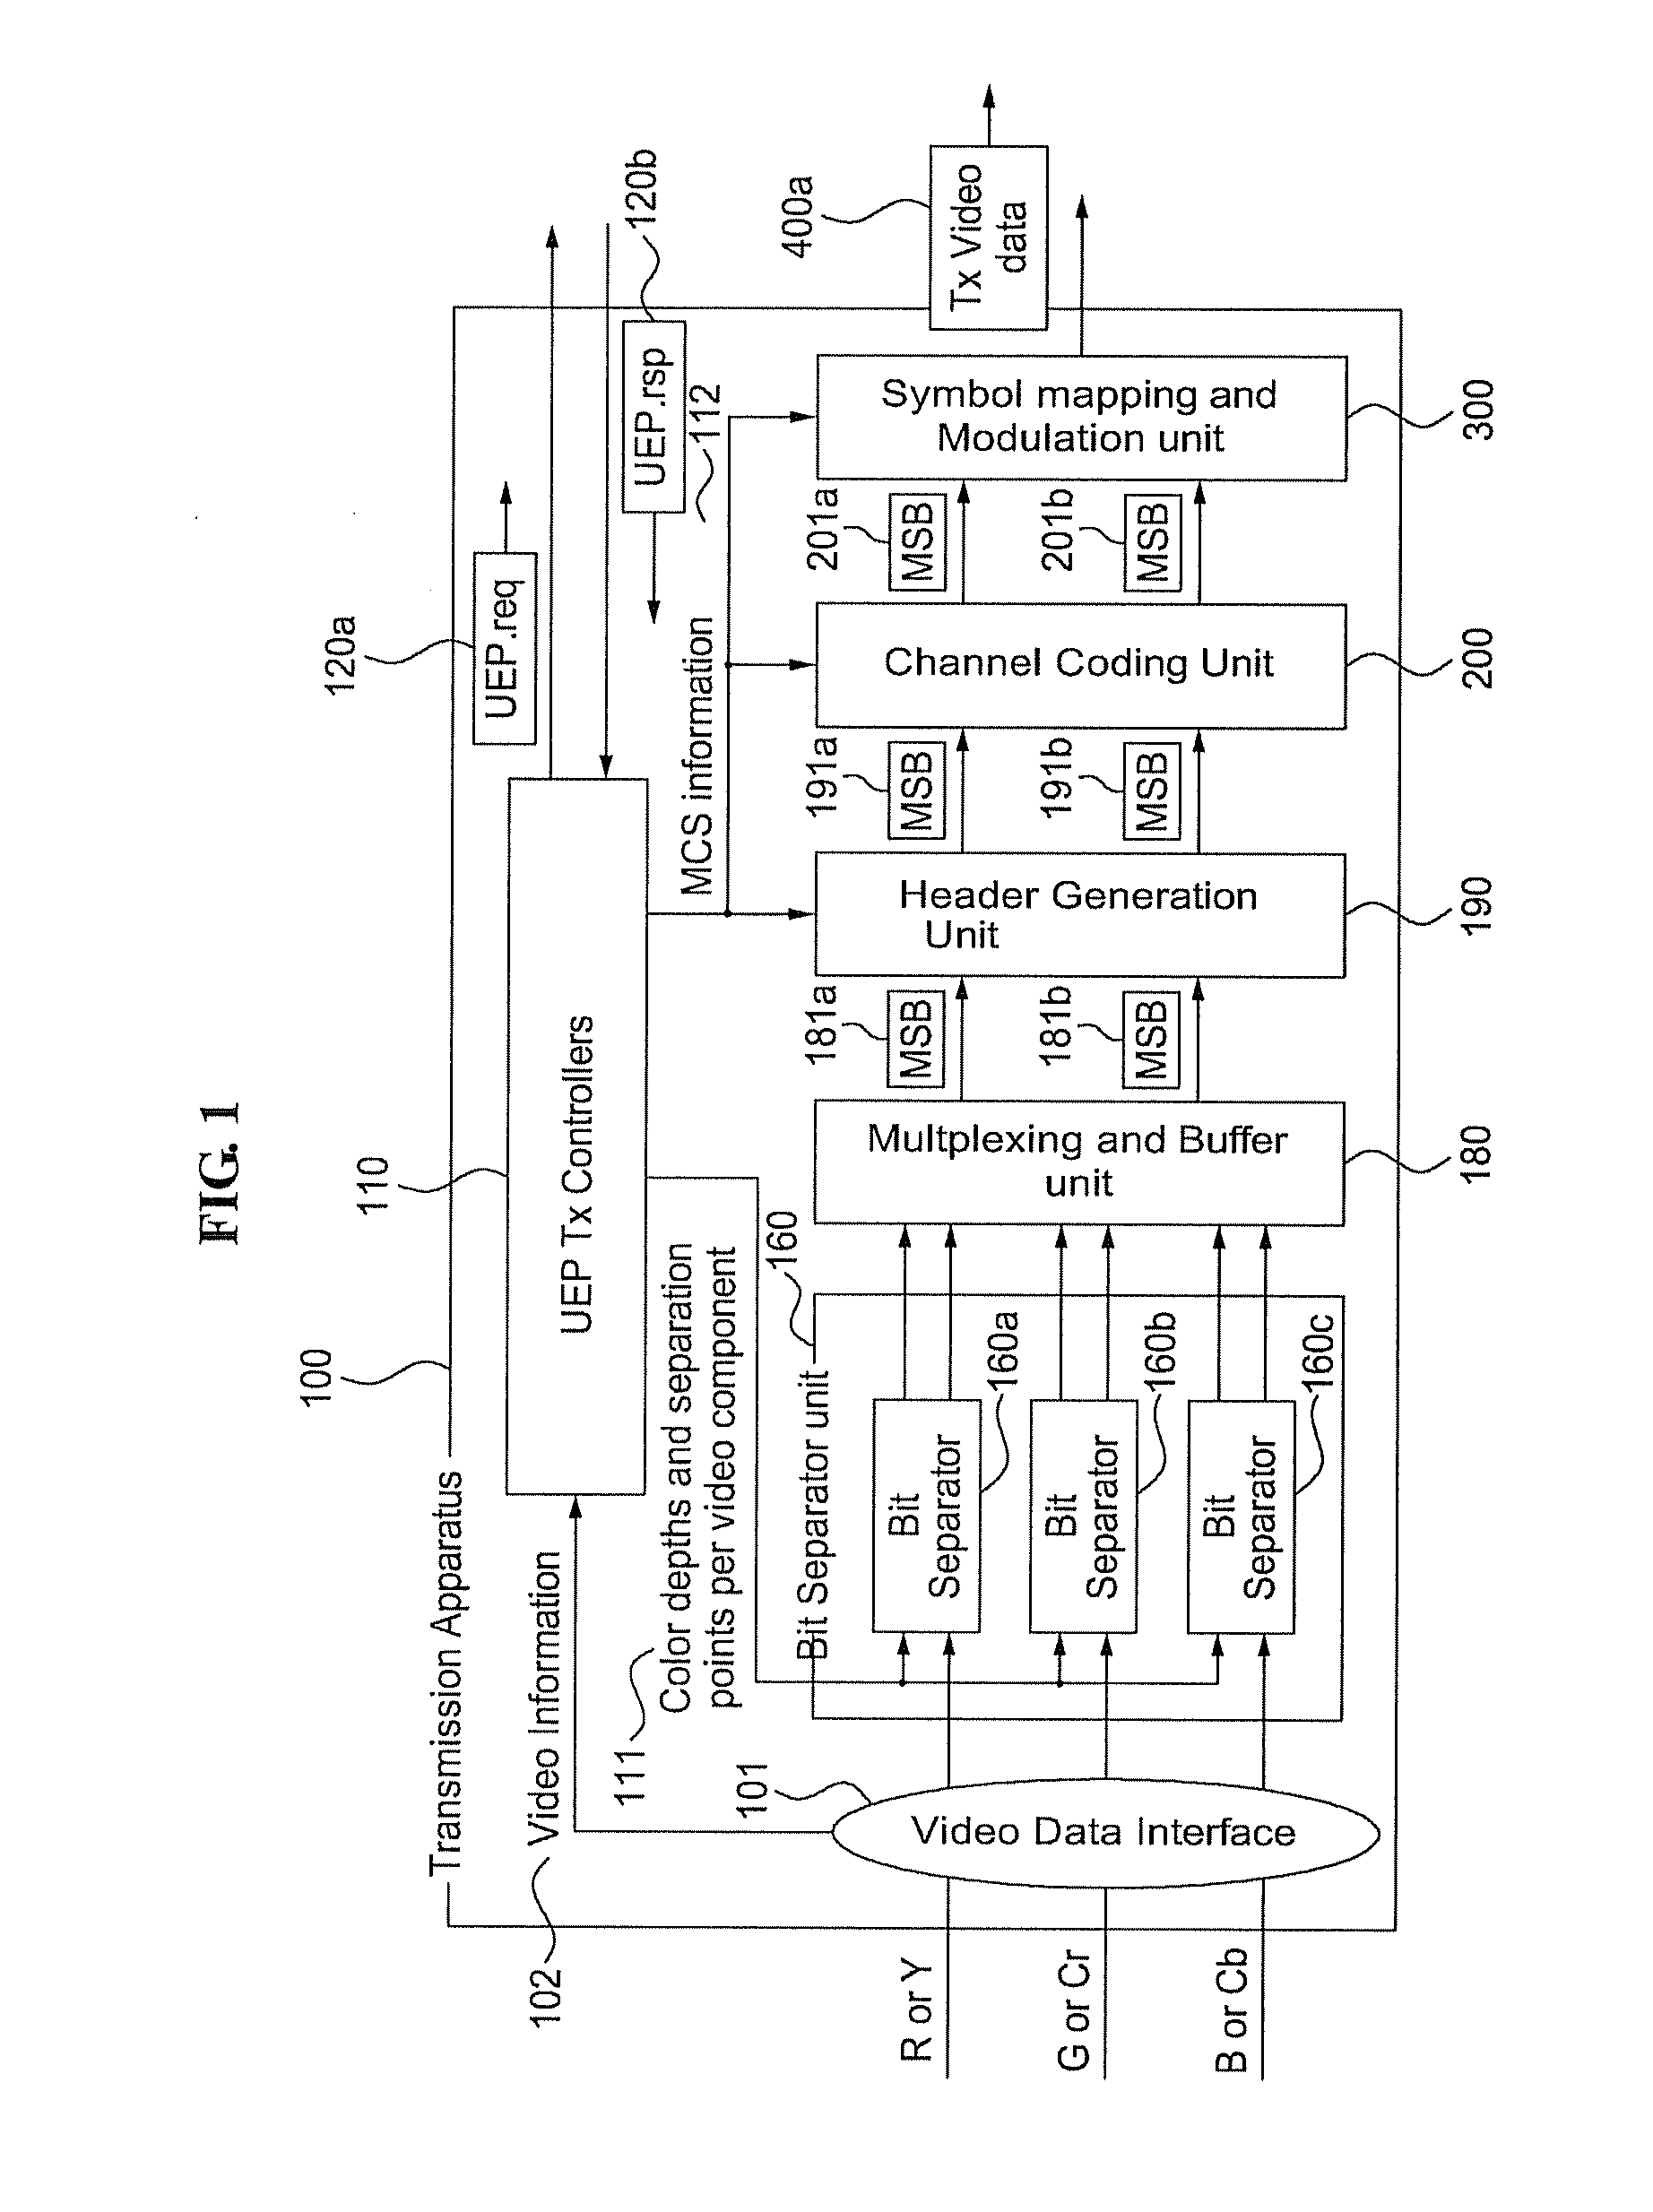 Method and apparatus for channel coding and modulation for unequal error protection in transmitting uncompressed video over wideband high frequency wireless system